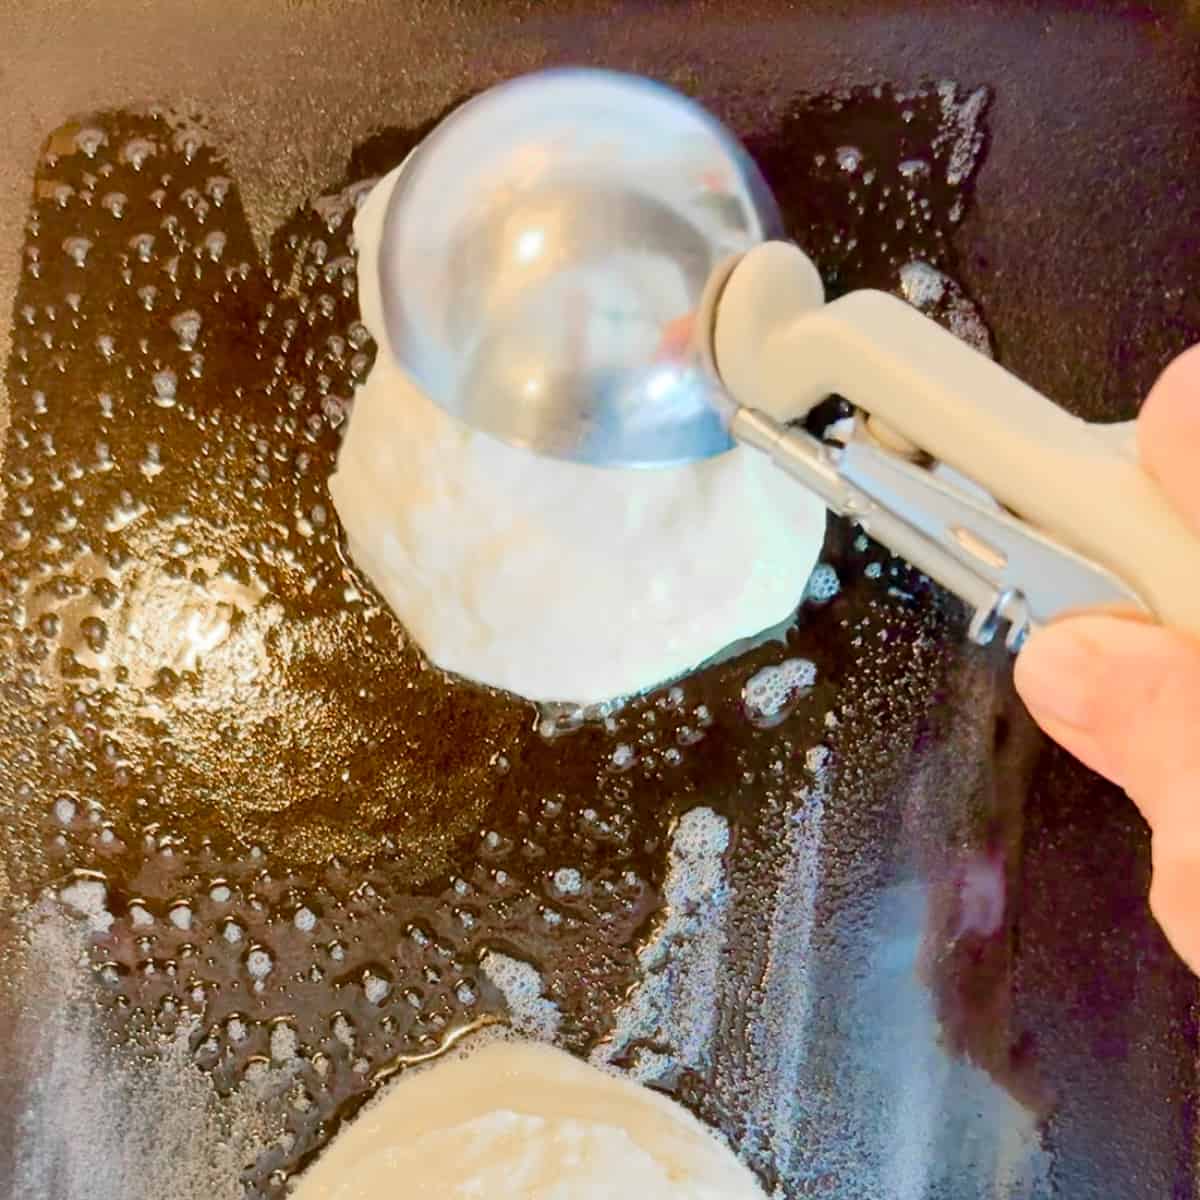 scooping pancake batter onto a griddle.